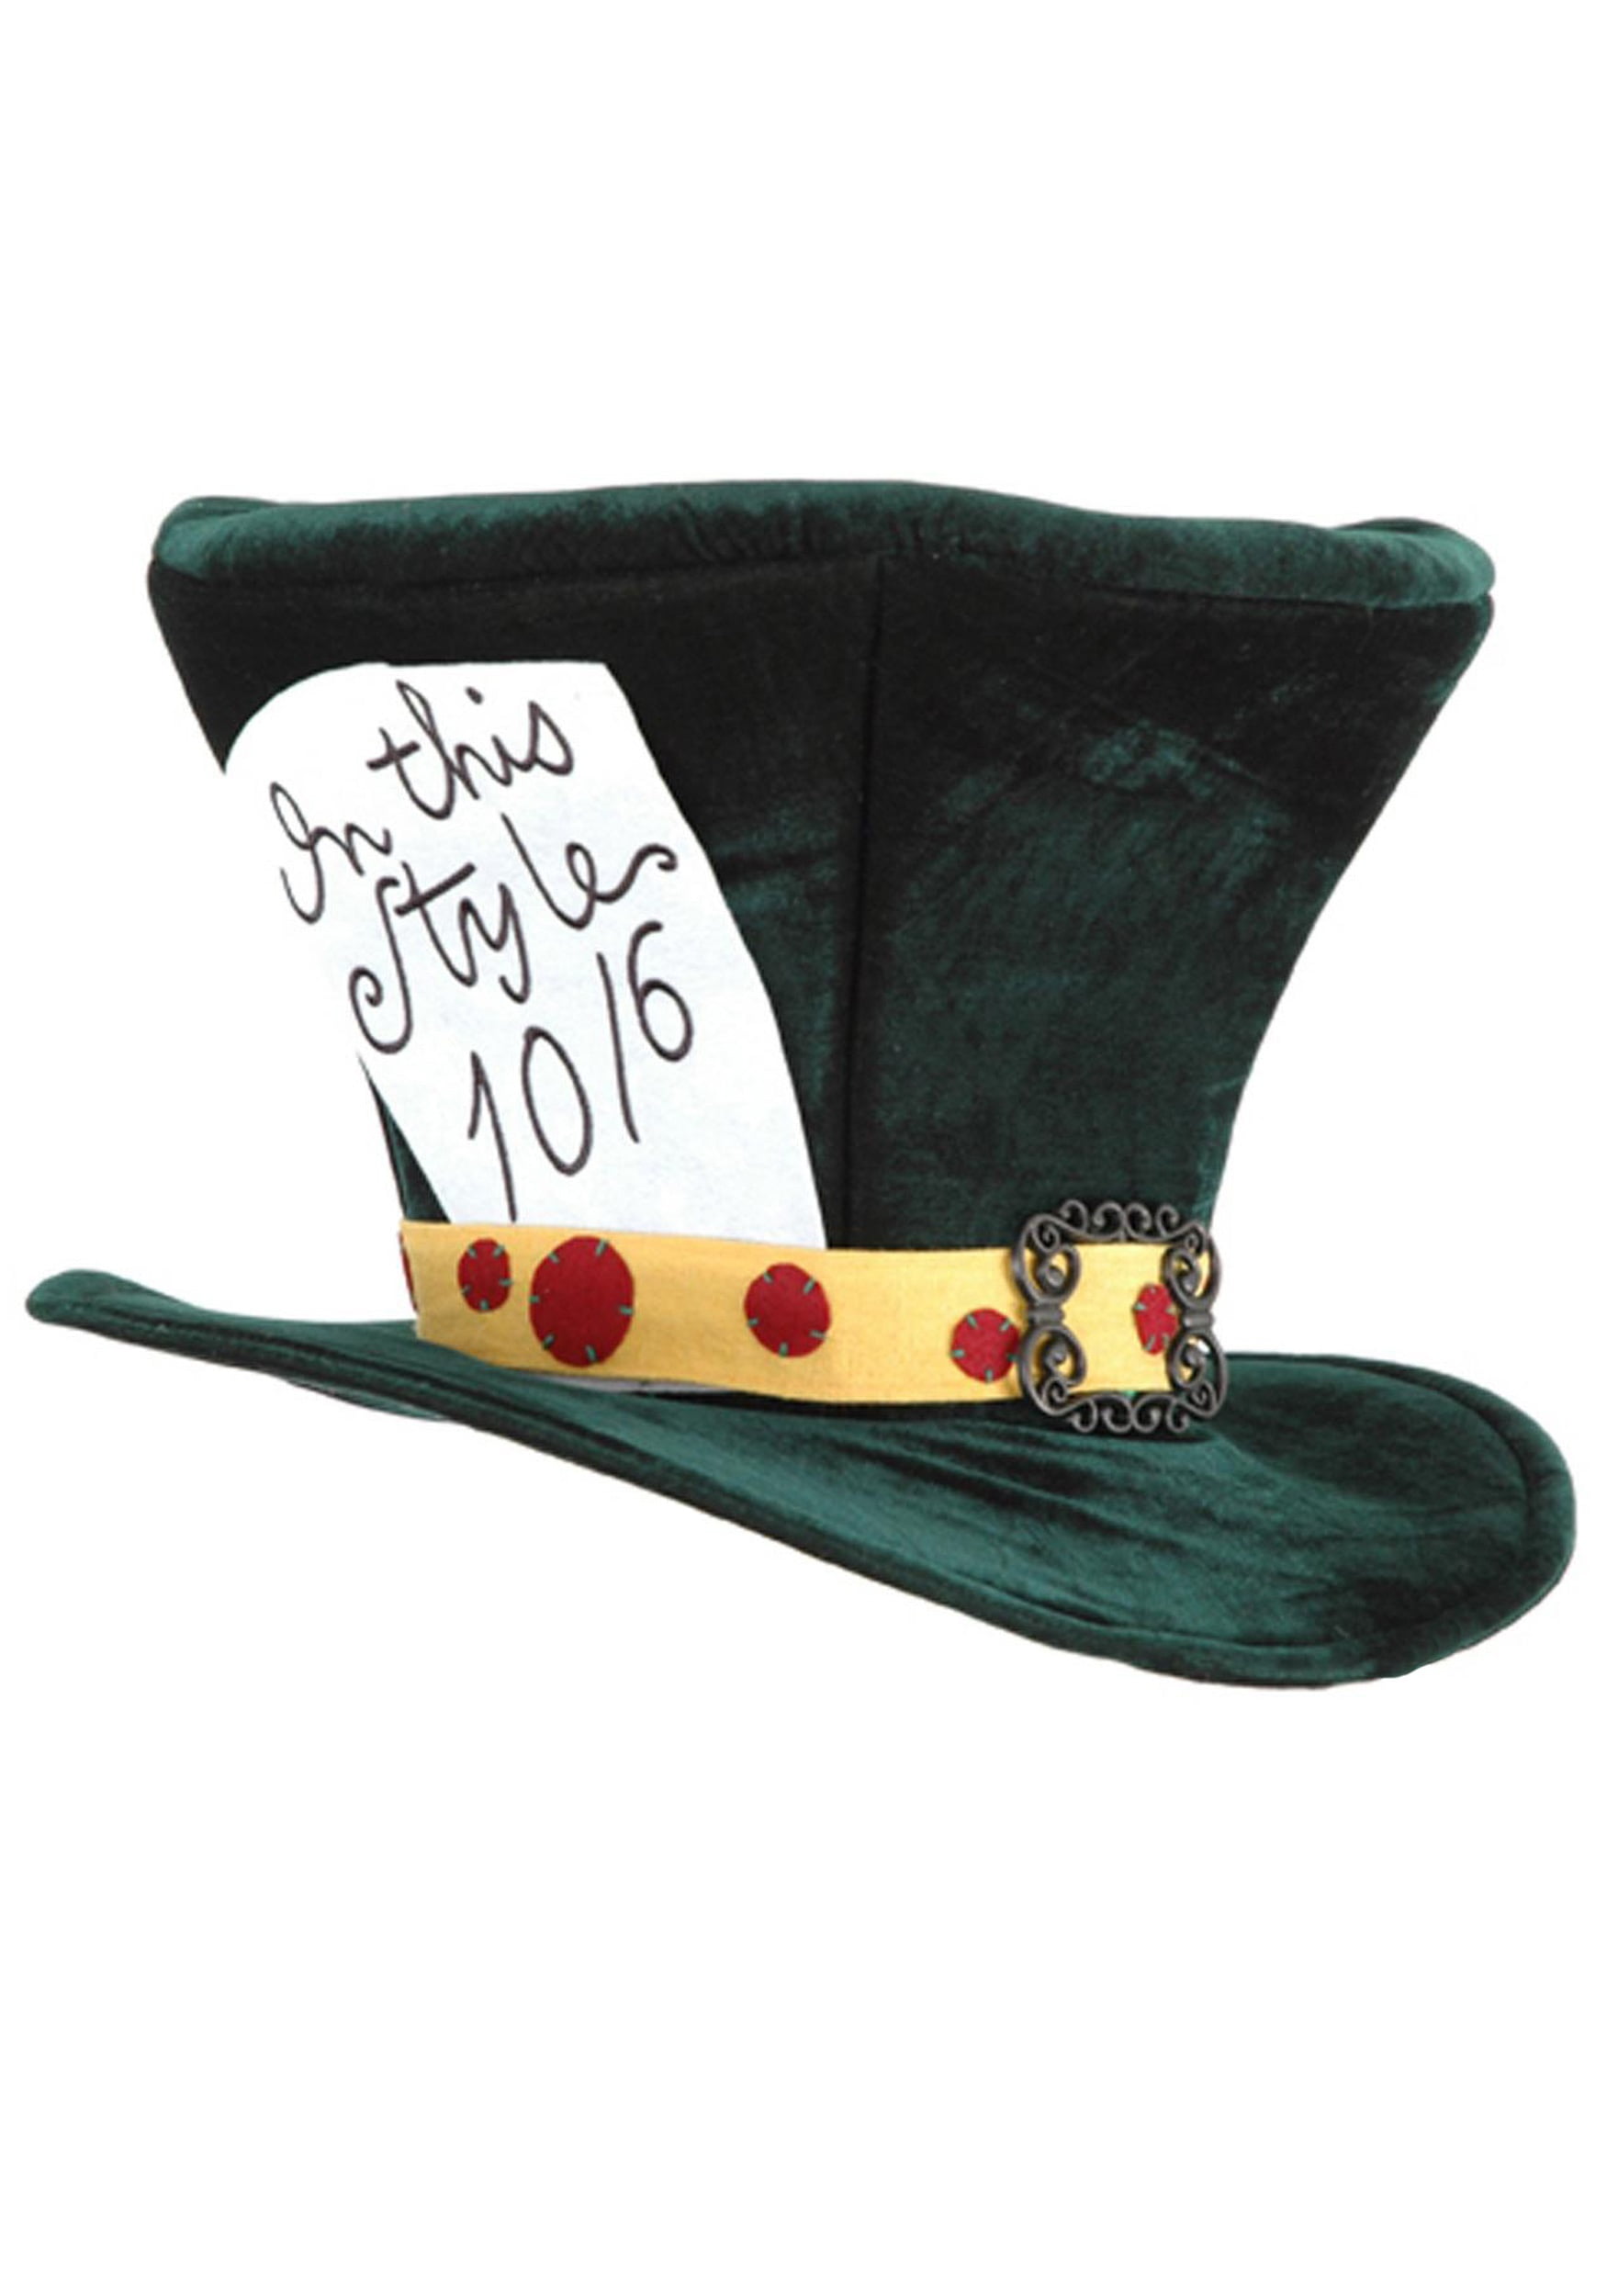 Tie-Dye Style Mad Hatter Felt Top Hat Costume Accessory 